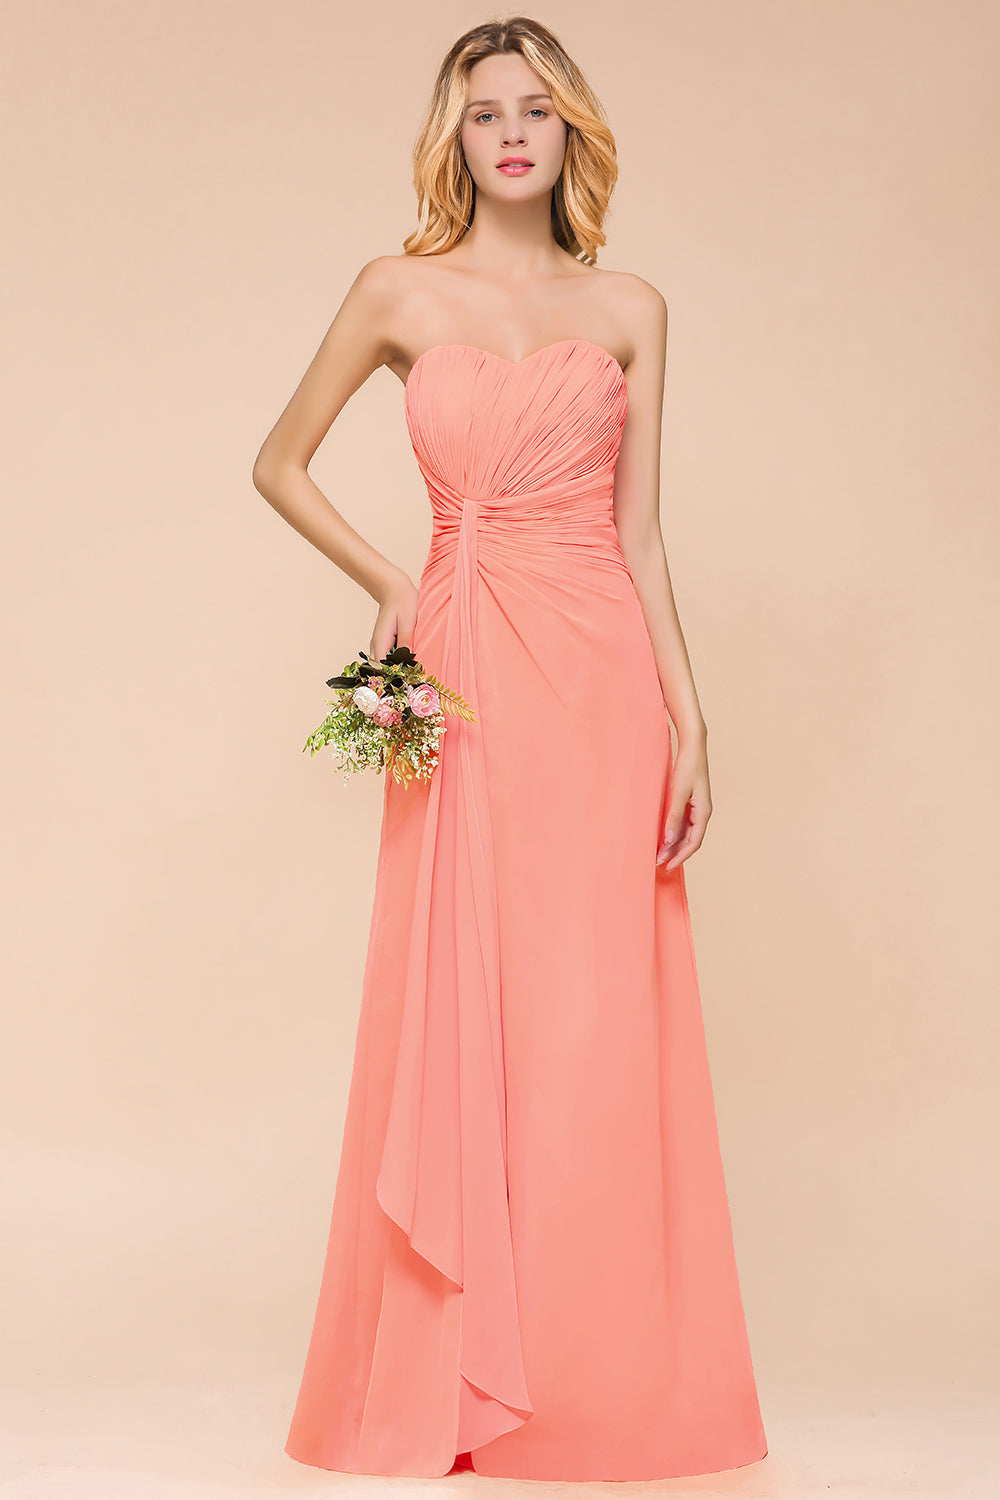 Load image into Gallery viewer, Stylish Sweetheart Ruffle Affordable Coral Chiffon Bridesmaid Dresses Online-27dress
